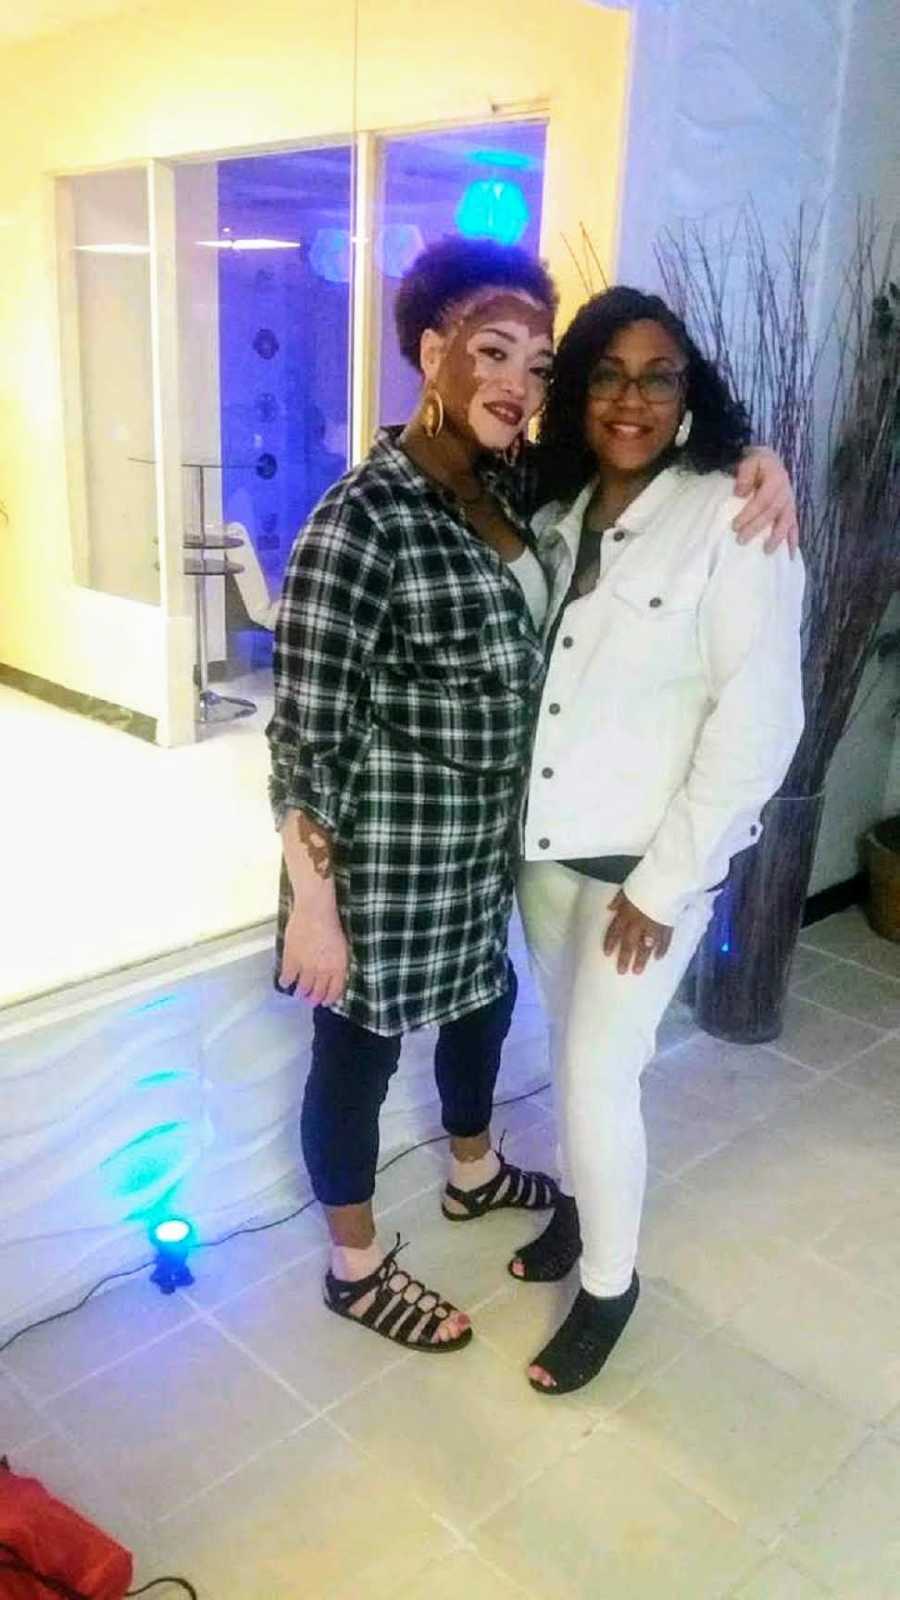 Woman with vitiligo stands smiling with arm around friend